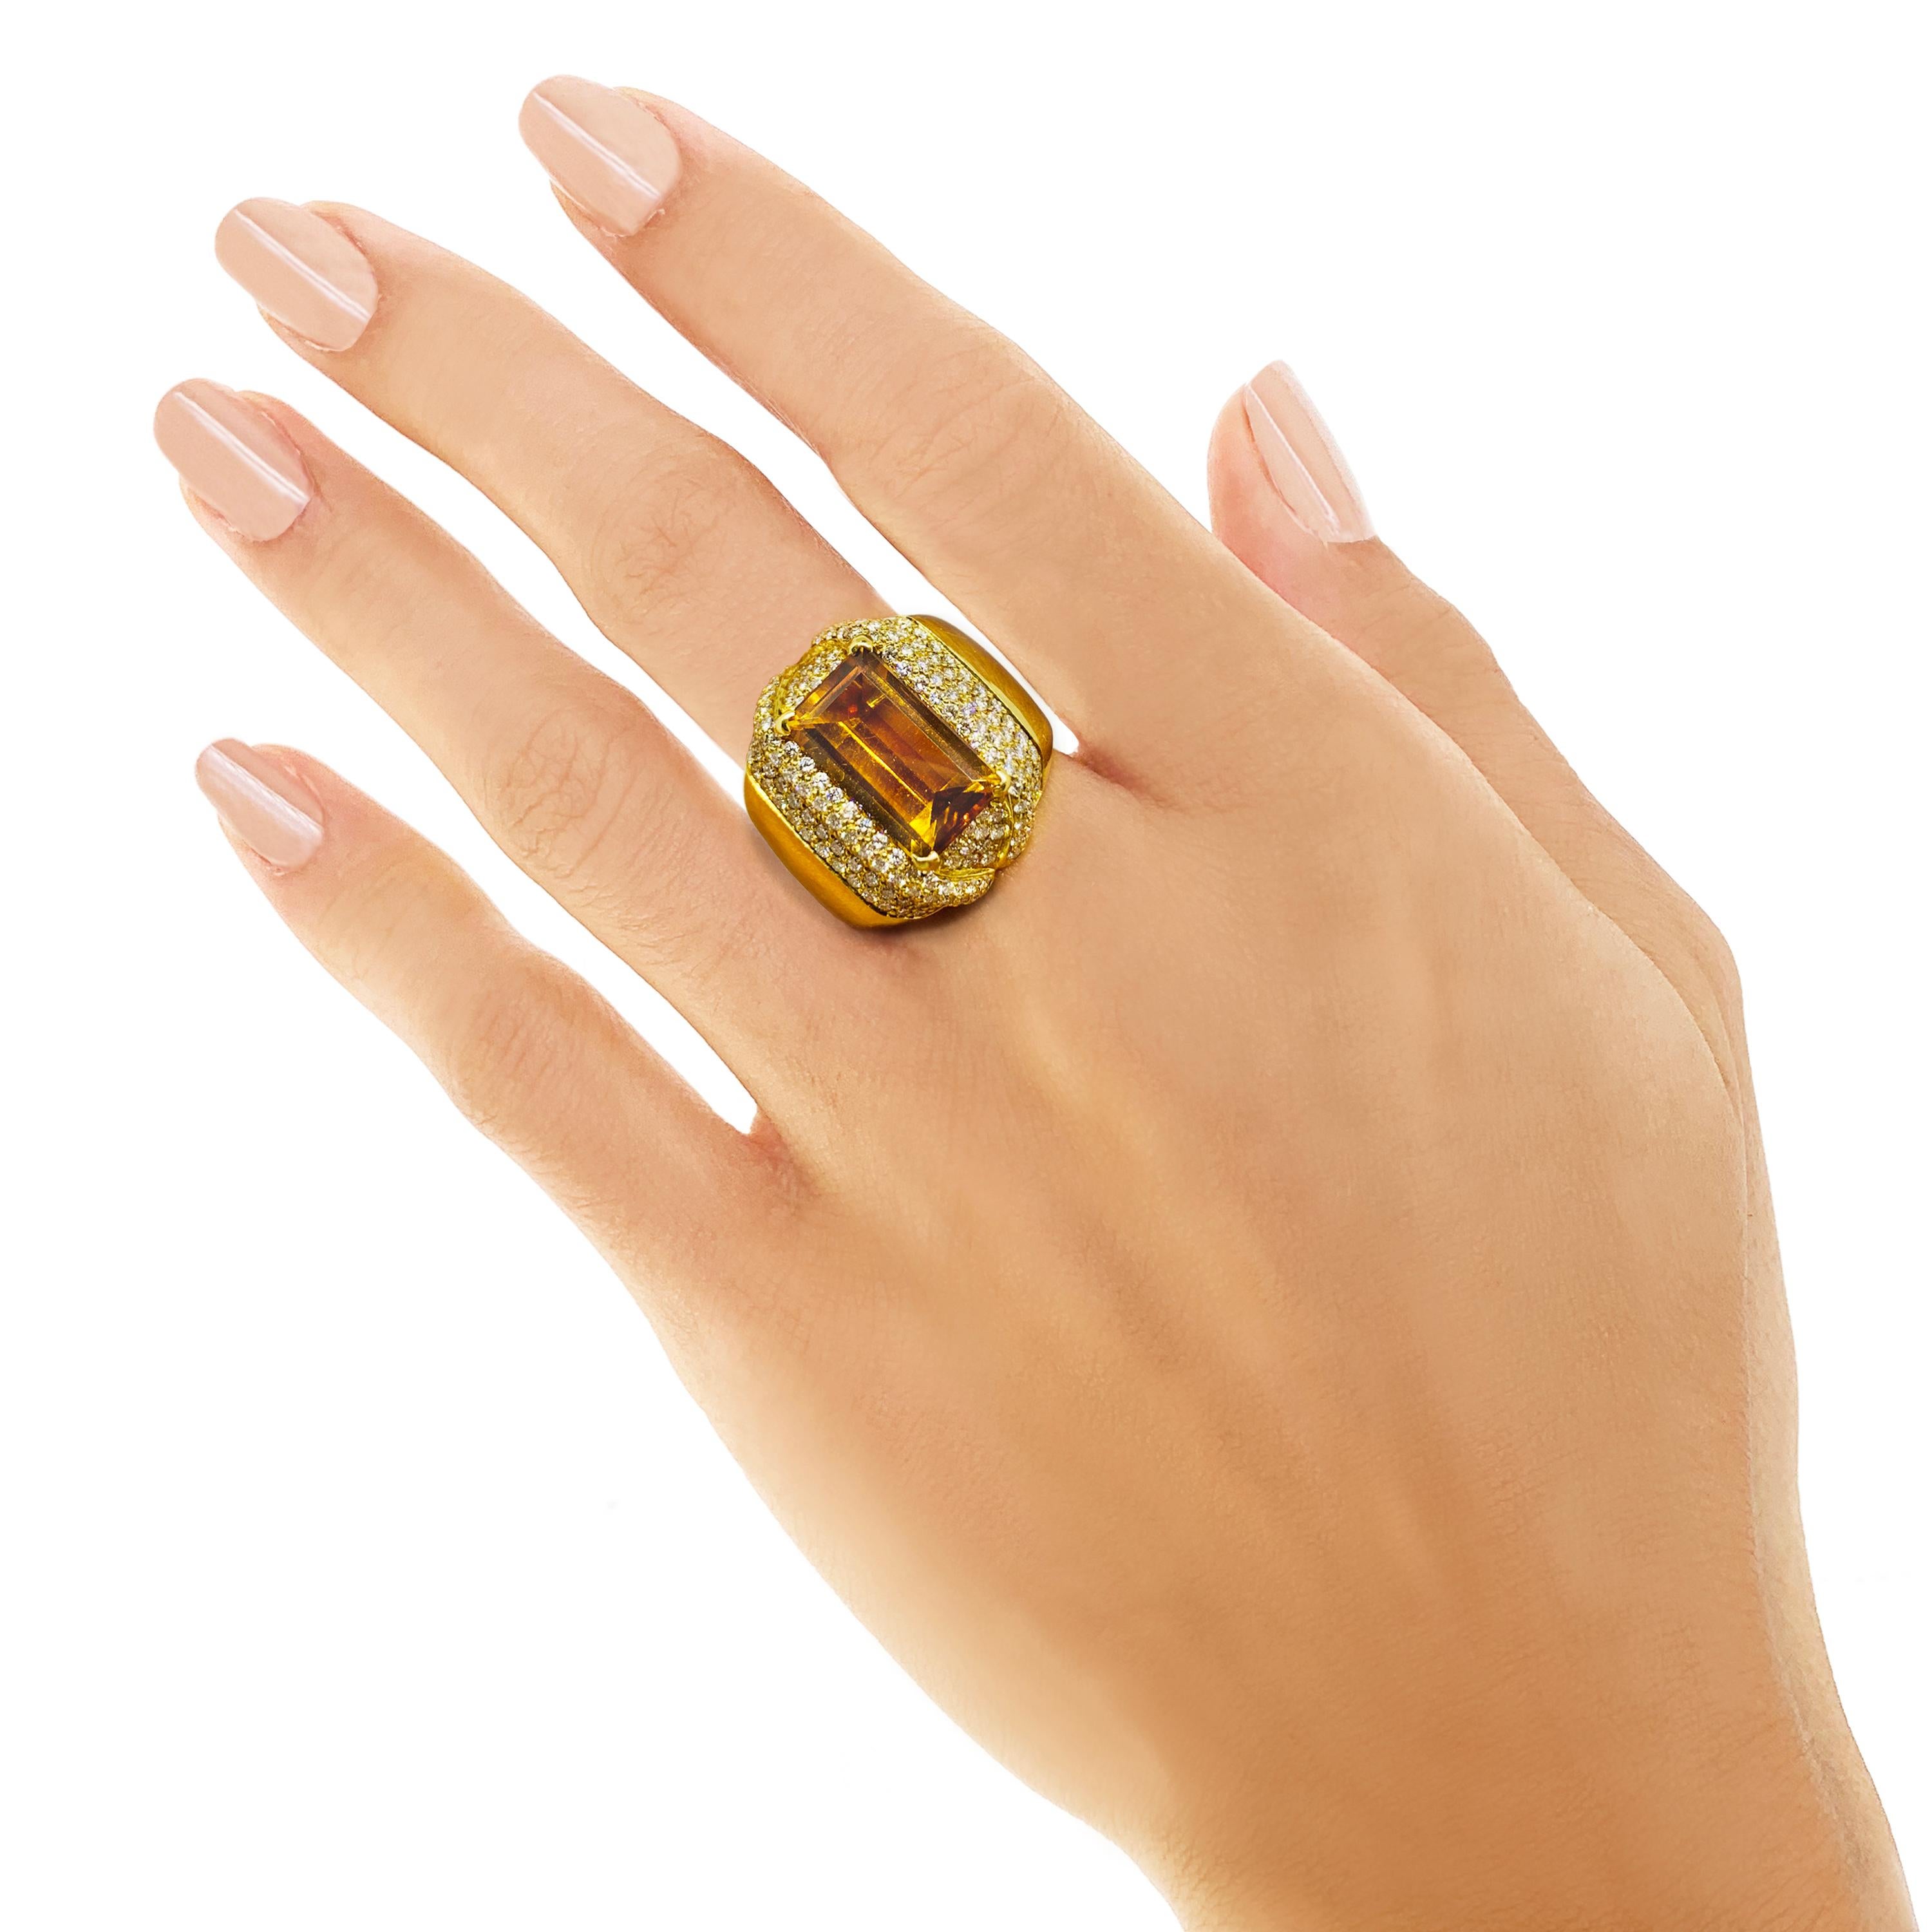 Rosior Contemporary Cocktail Ring manufactured set in Yellow Gold with:
- 1 